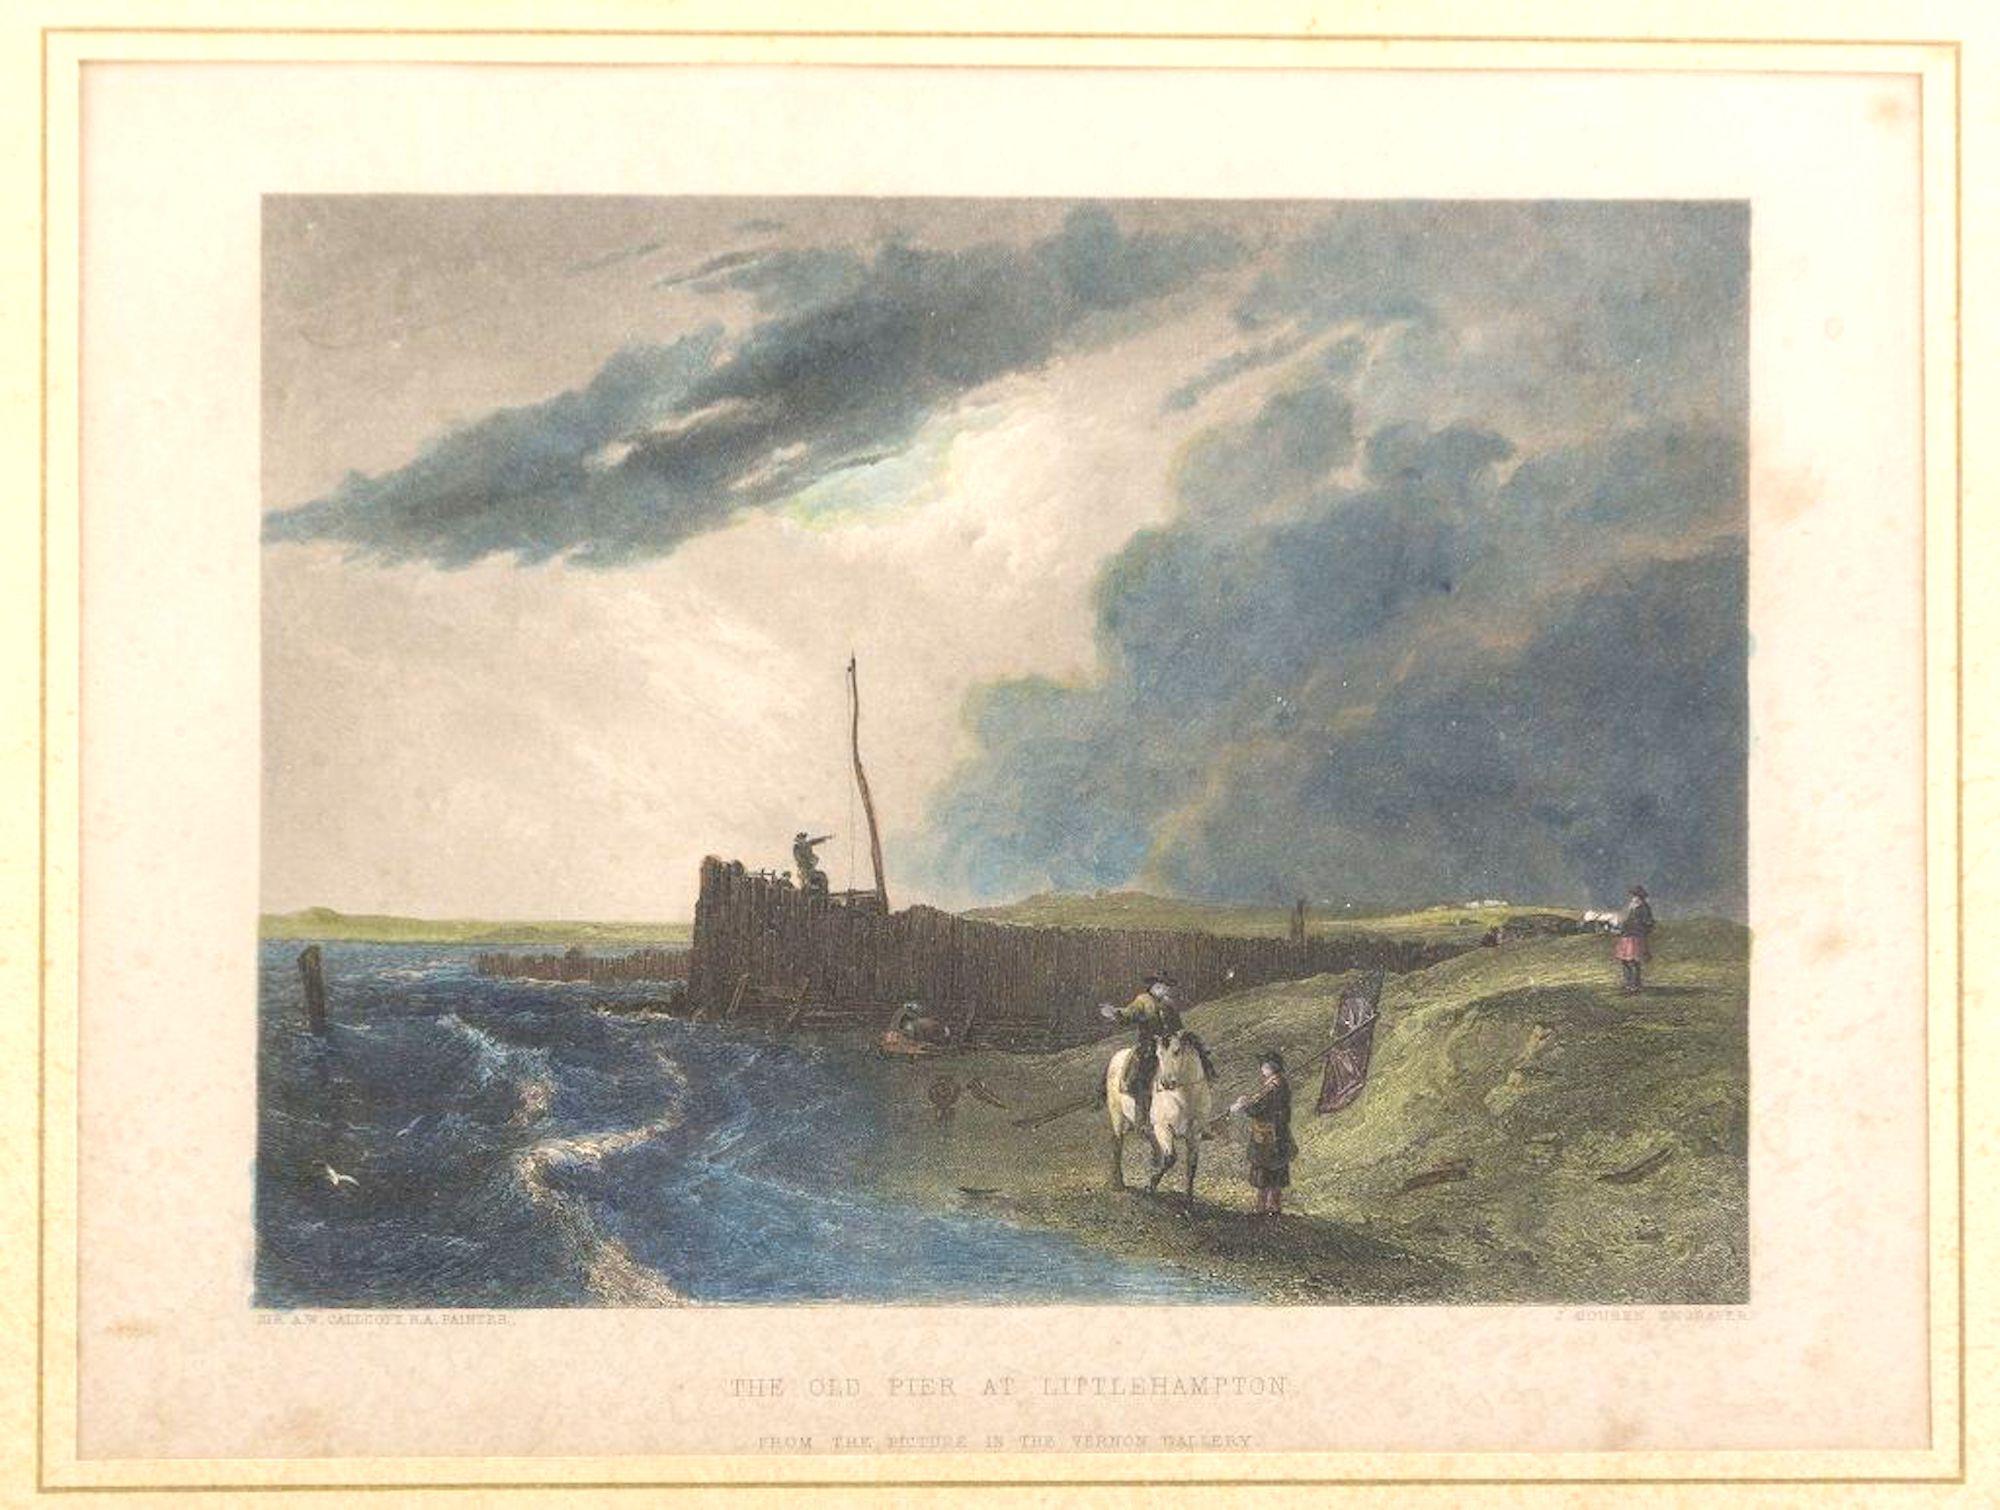 The Old Pier at Littlehampton - Lithograph on Paper by J. Cousen - Mid-1800 - Print by John Cousen